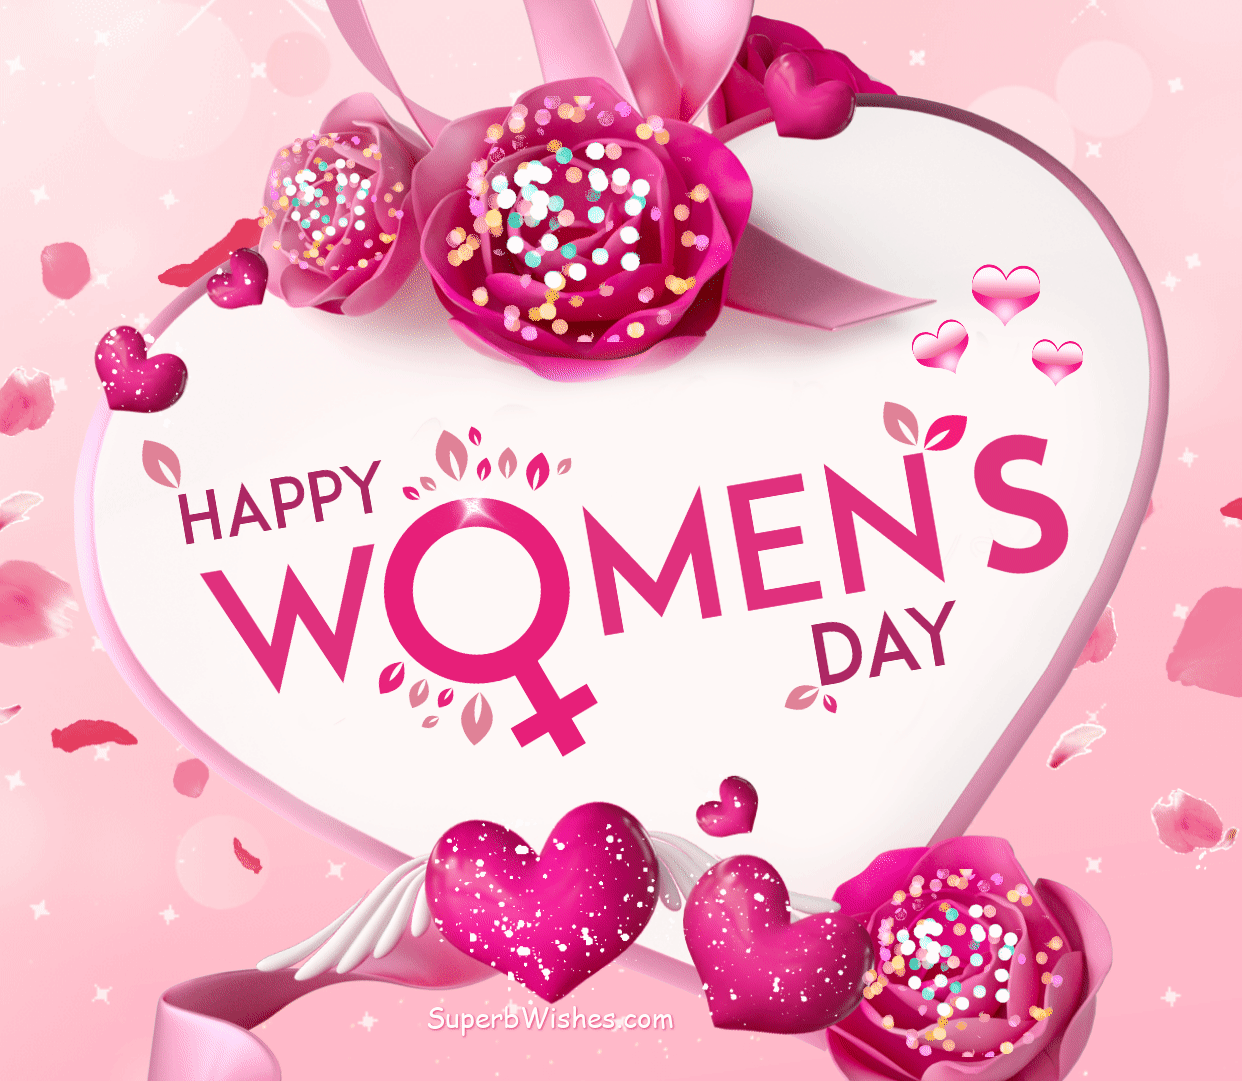 Women's Day March 8, 2023 Creative Greeting Card GIF | SuperbWishes